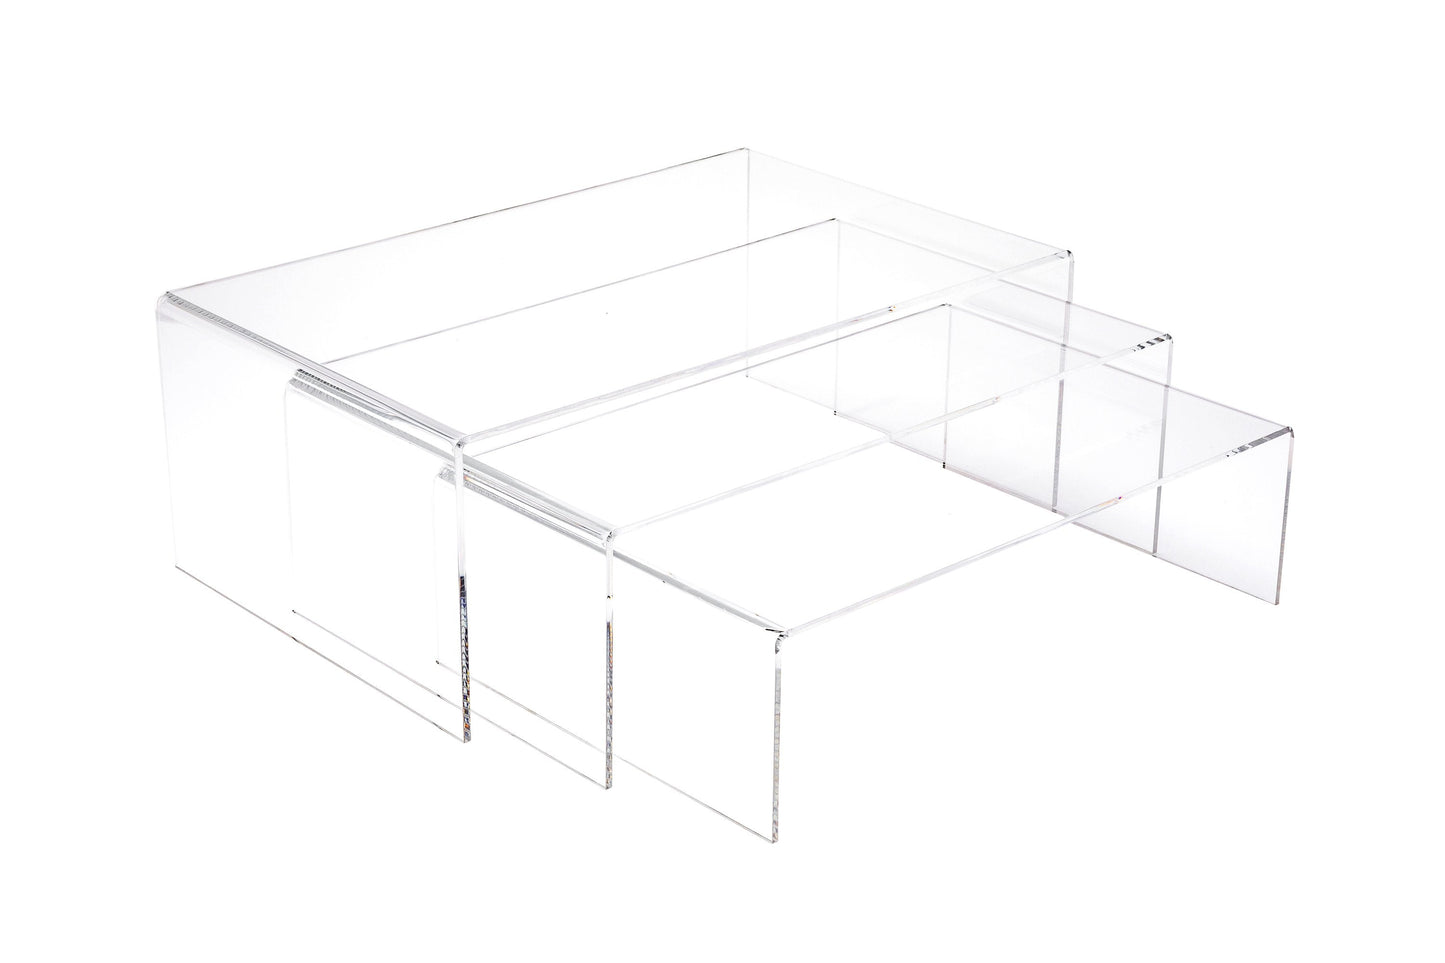 Clear Tek Clear Acrylic Buffet Display Stand - 3 Sizes - 15 3/4" x 11 3/4" x 6" - 1 count box